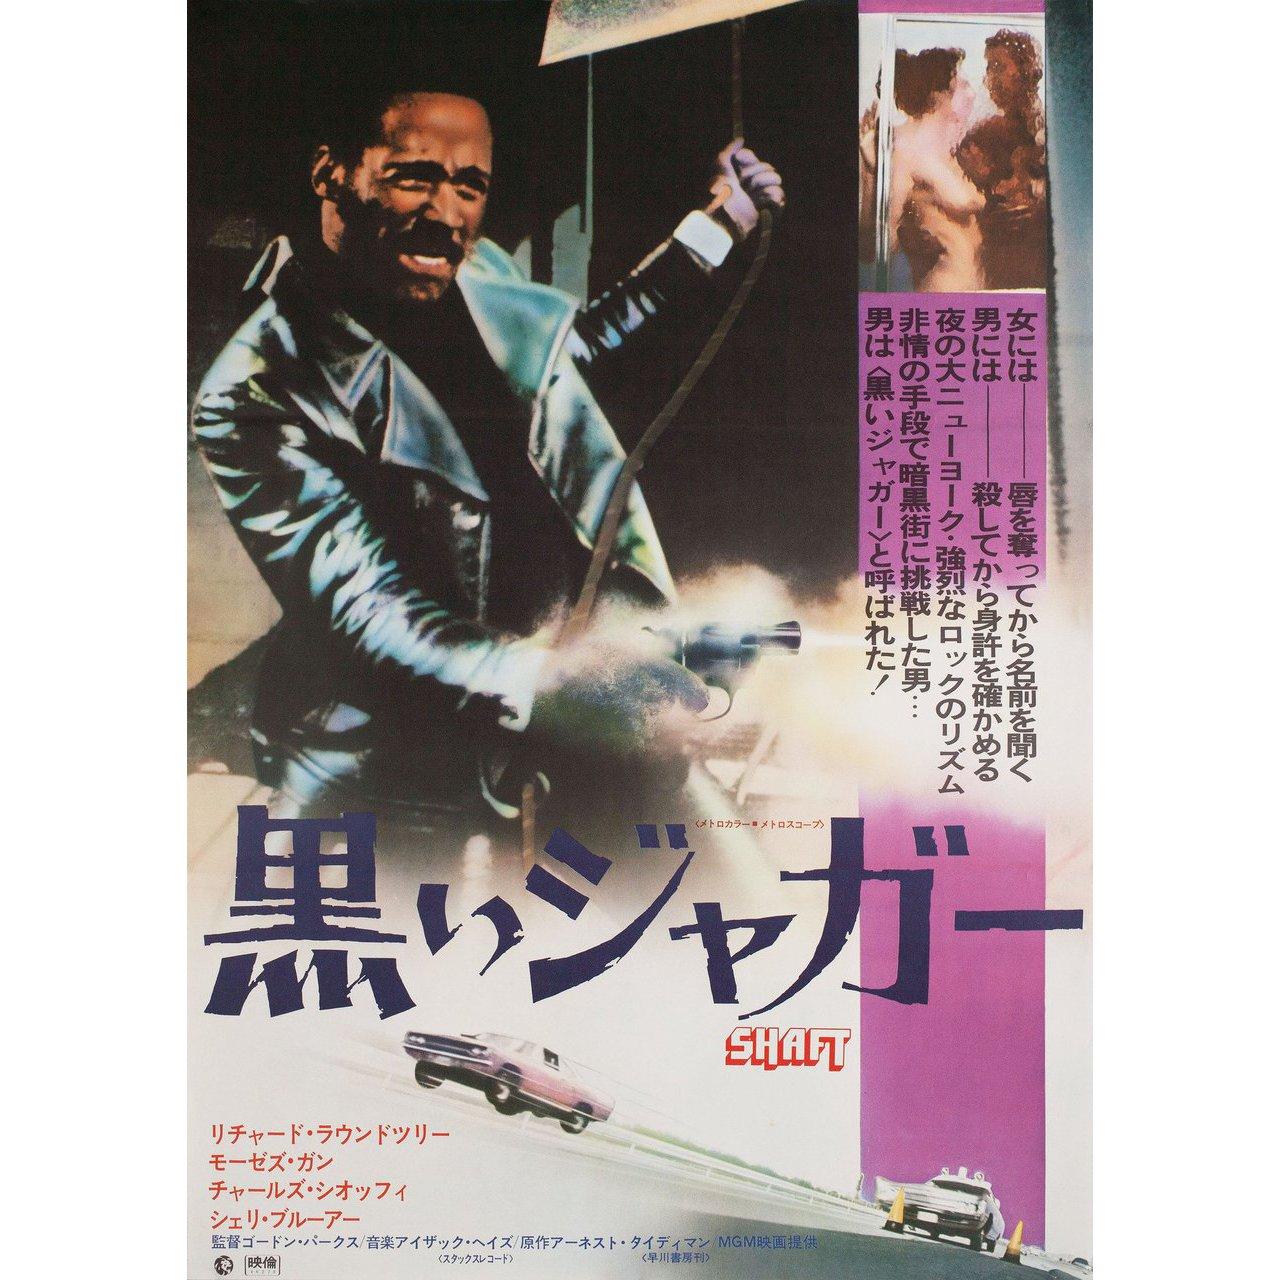 Original 1971 Japanese B2 poster for the film ‘Shaft’ directed by Gordon Parks with Richard Roundtree / Moses Gunn / Charles Cioffi / Christopher St. John. Very good-fine condition, rolled. Please note, the size is stated in inches and the actual